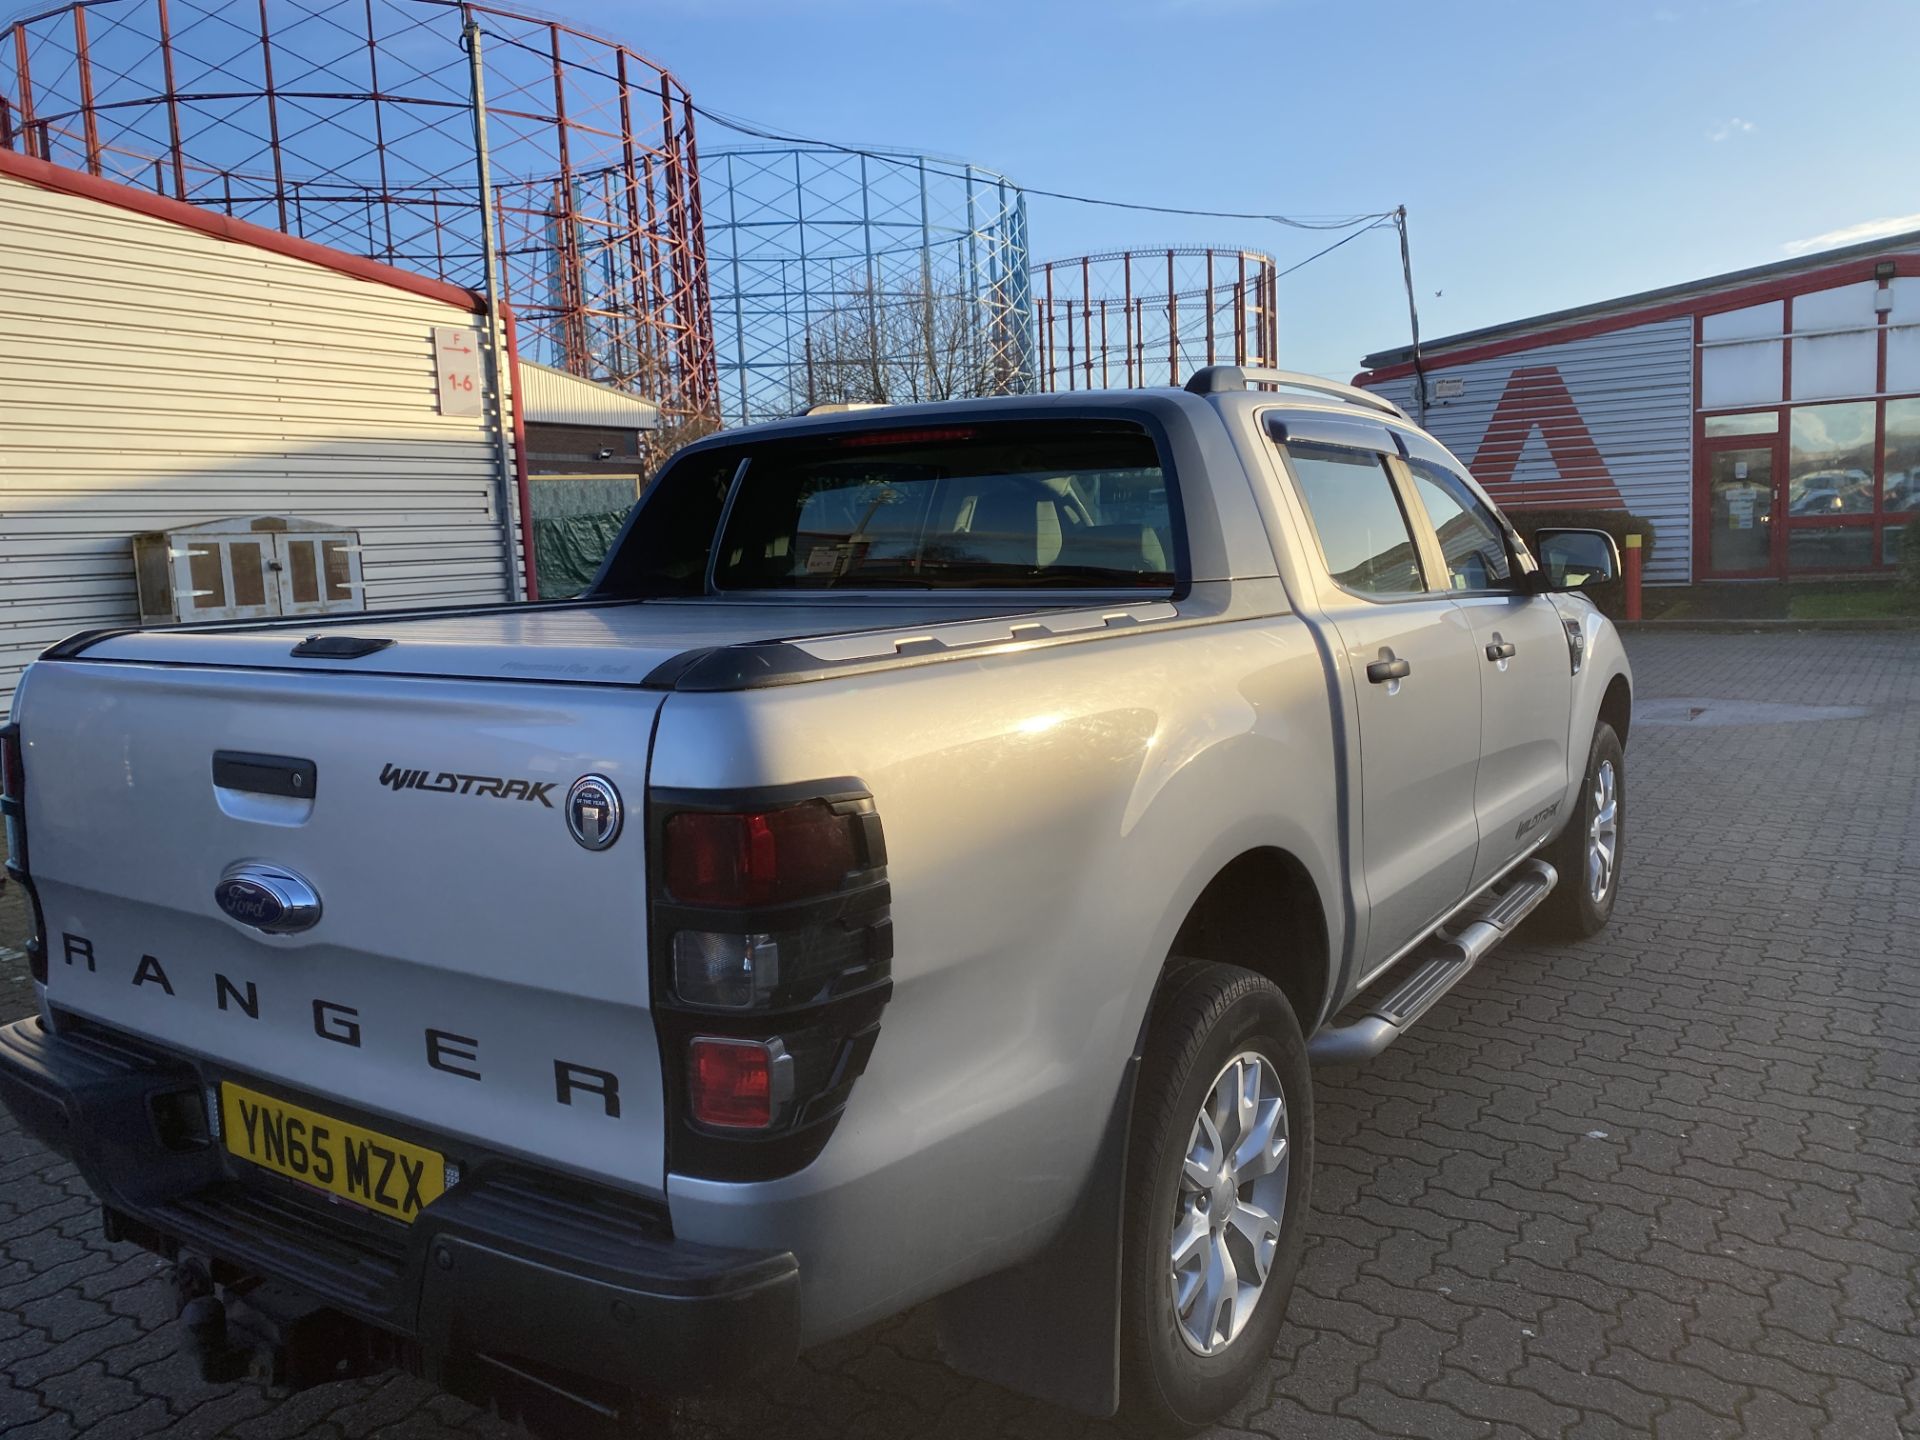 Ford Ranger Wildtrak 4 x 4 3.2 TDCI 6 Speed Automatic Double Cab Pick Up Truck, Silver - Image 9 of 30